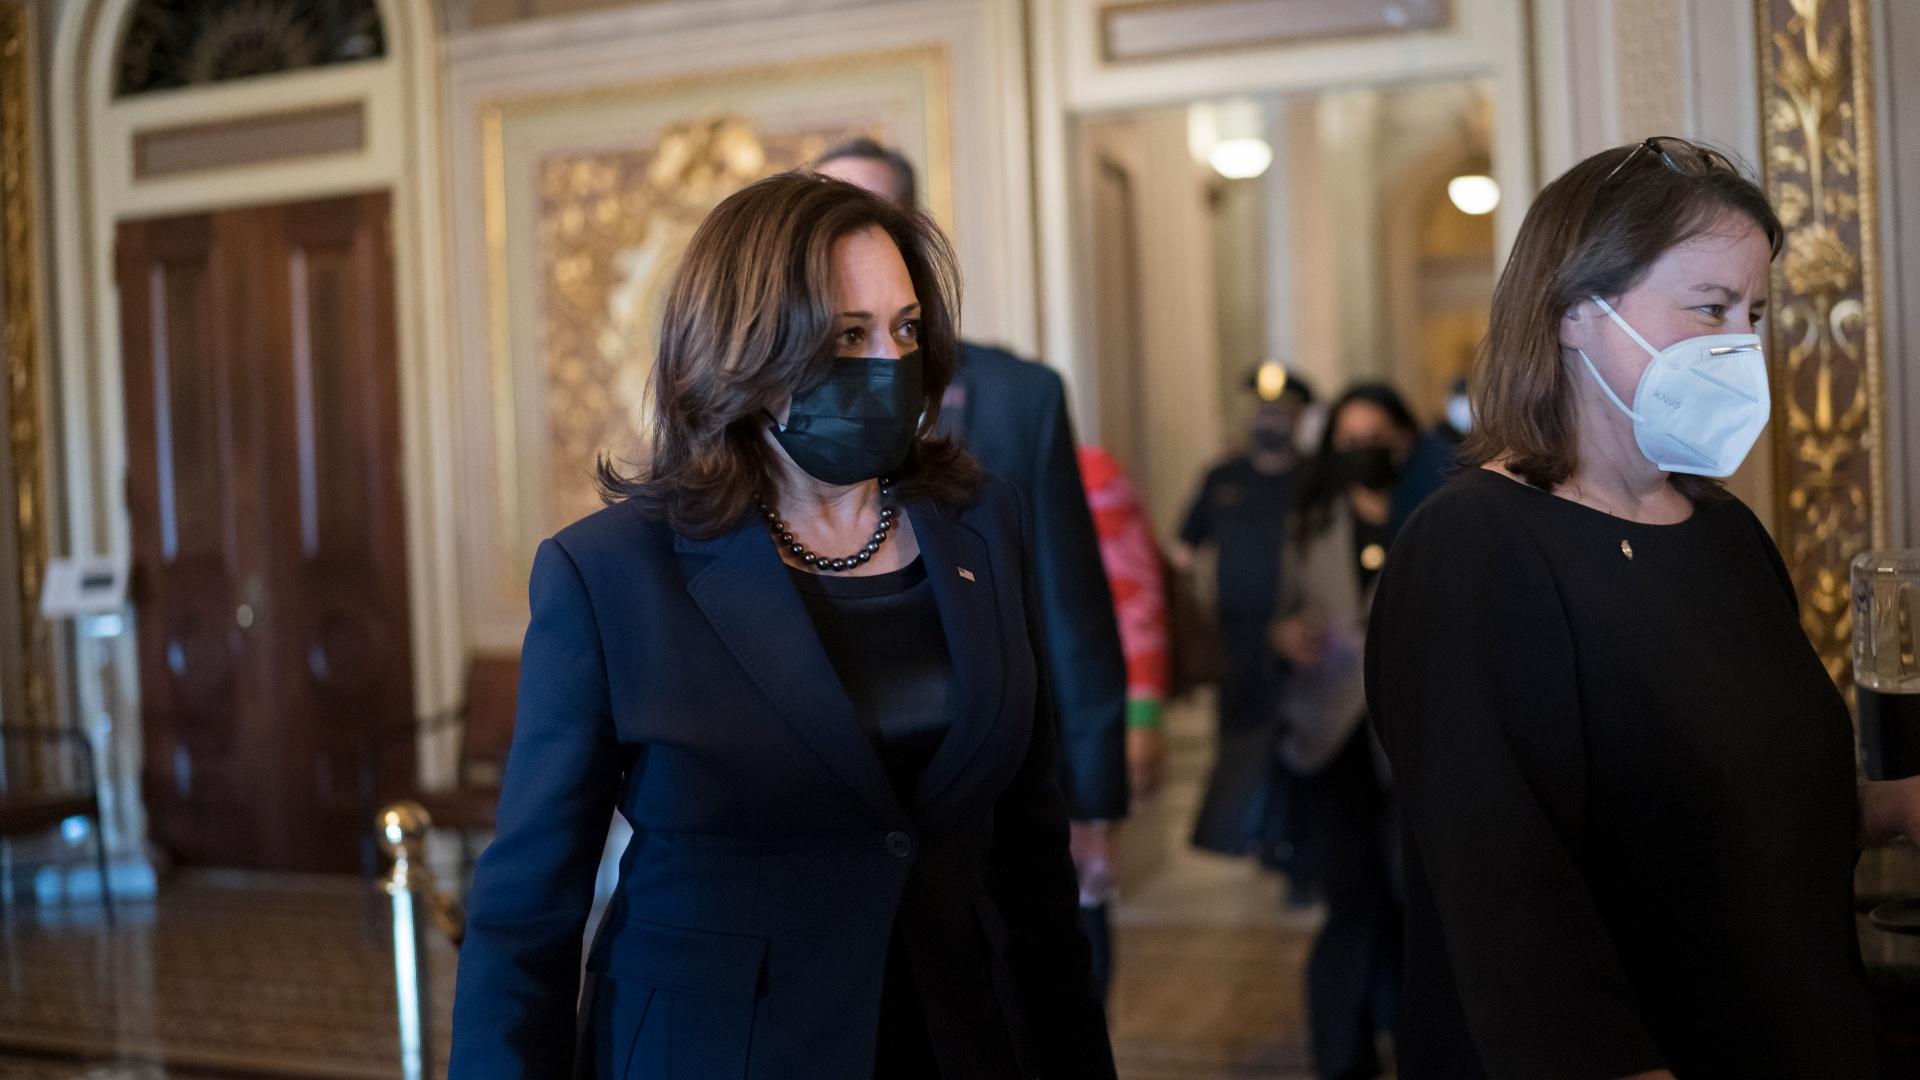 Vice President Kamala Harris arrives to break the tie on a procedural vote as the Senate works on the Democrats' .9 trillion COVID relief package, on Capitol Hill in Washington, Thursday, March 4, 2021. (AP Photo / J. Scott Applewhite)